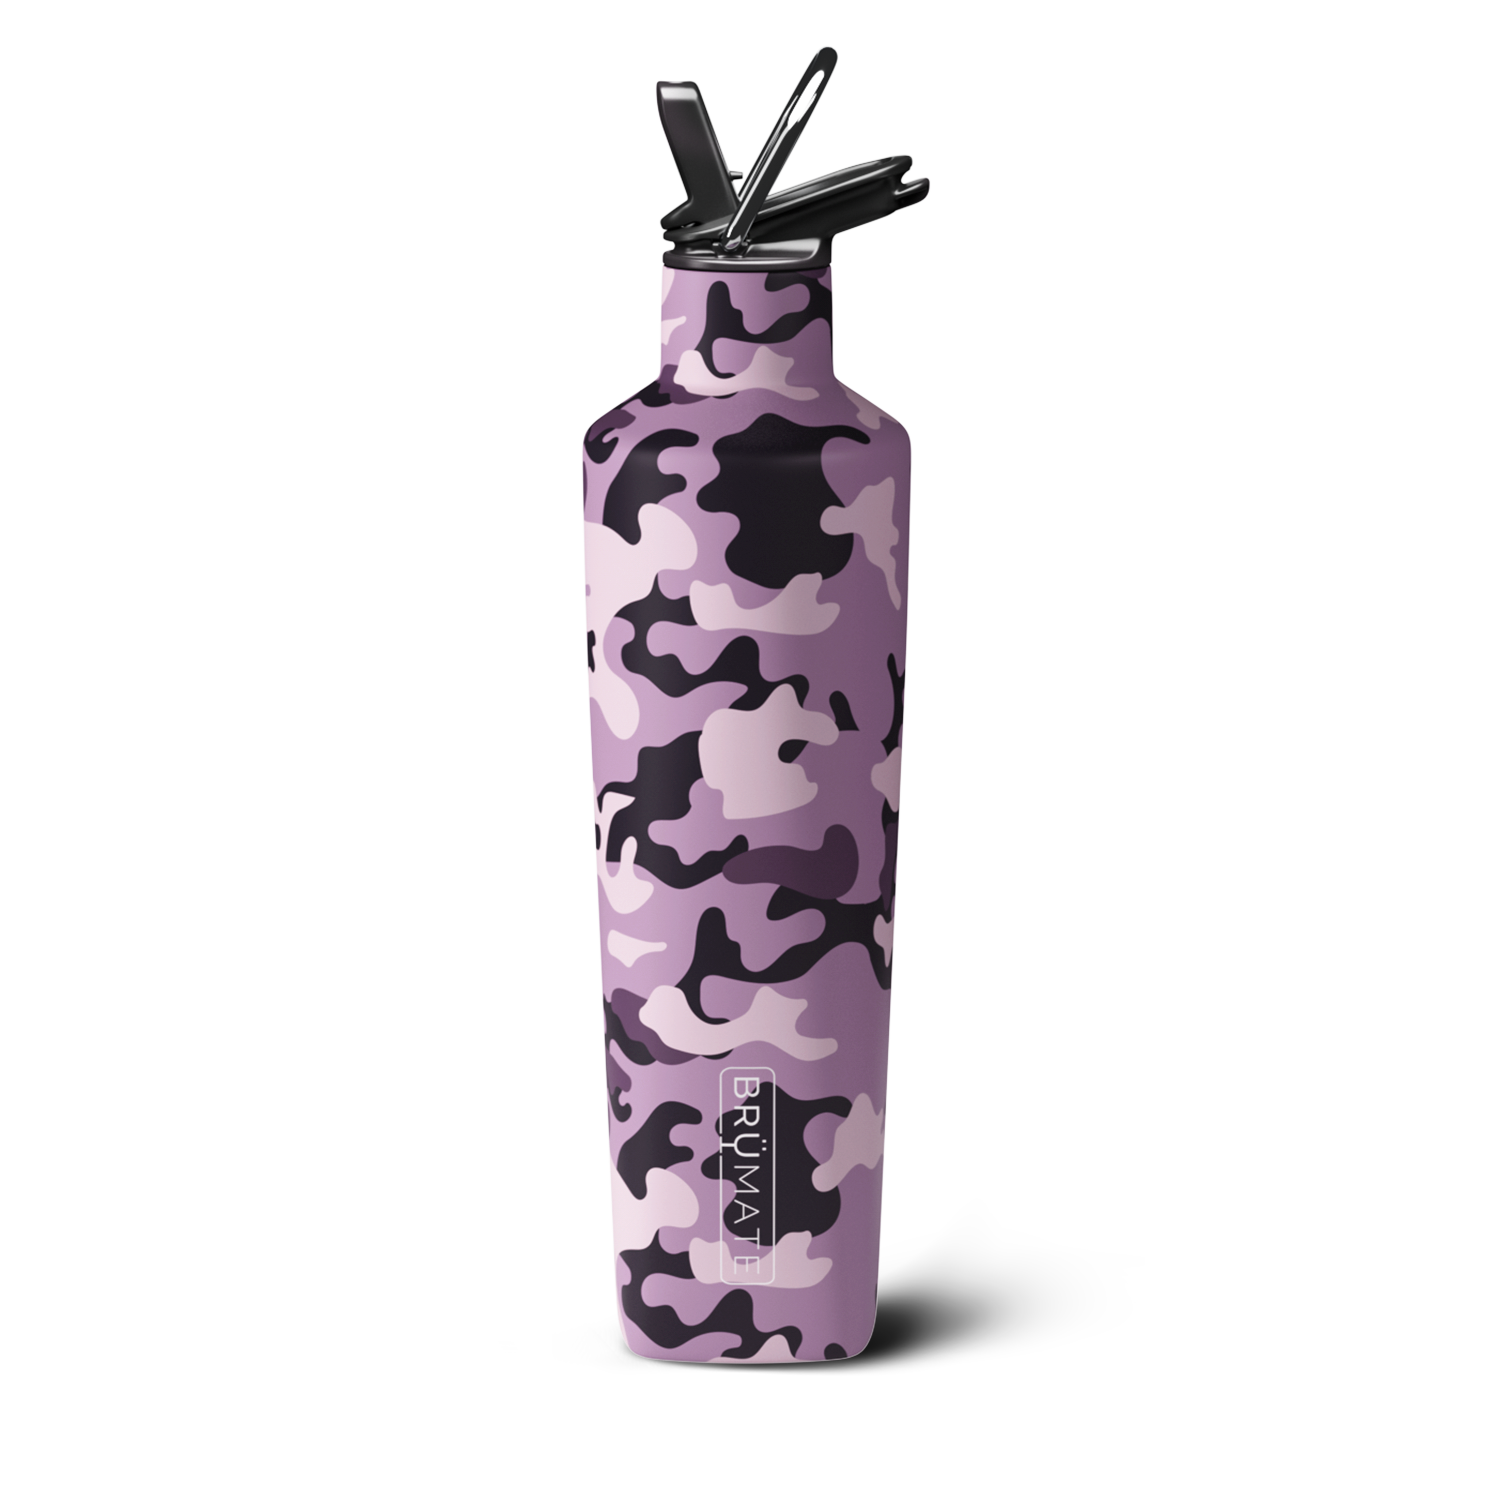 https://cdn.shopify.com/s/files/1/1114/2308/products/Rehydration-MauveCamo.png?v=1664394485